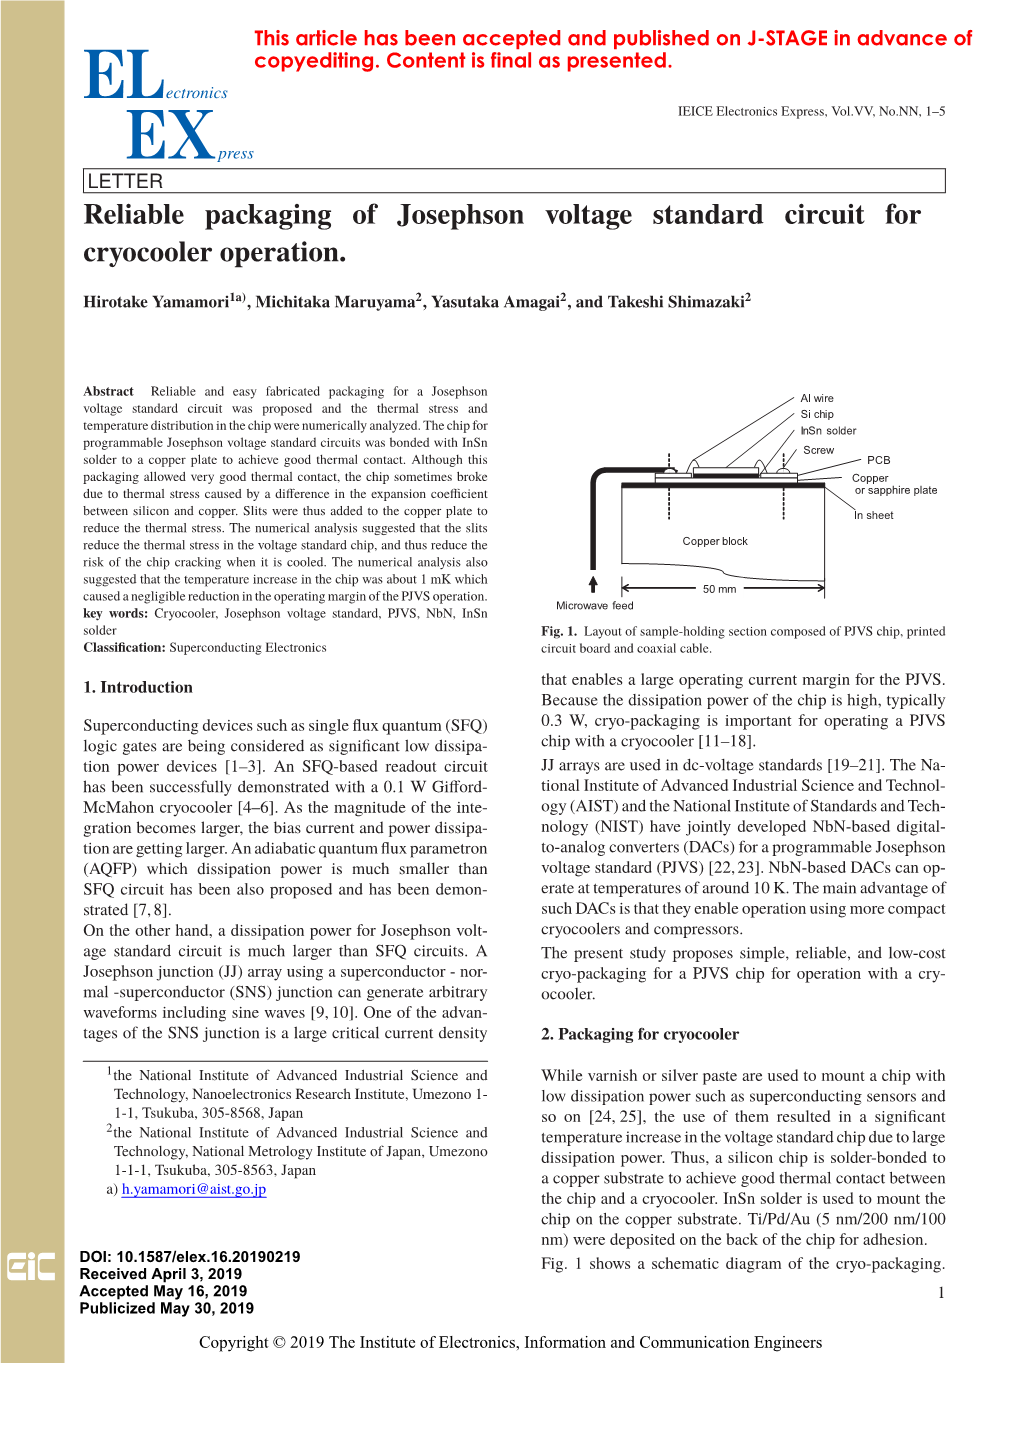 Reliable Packaging of Josephson Voltage Standard Circuit for Cryocooler Operation